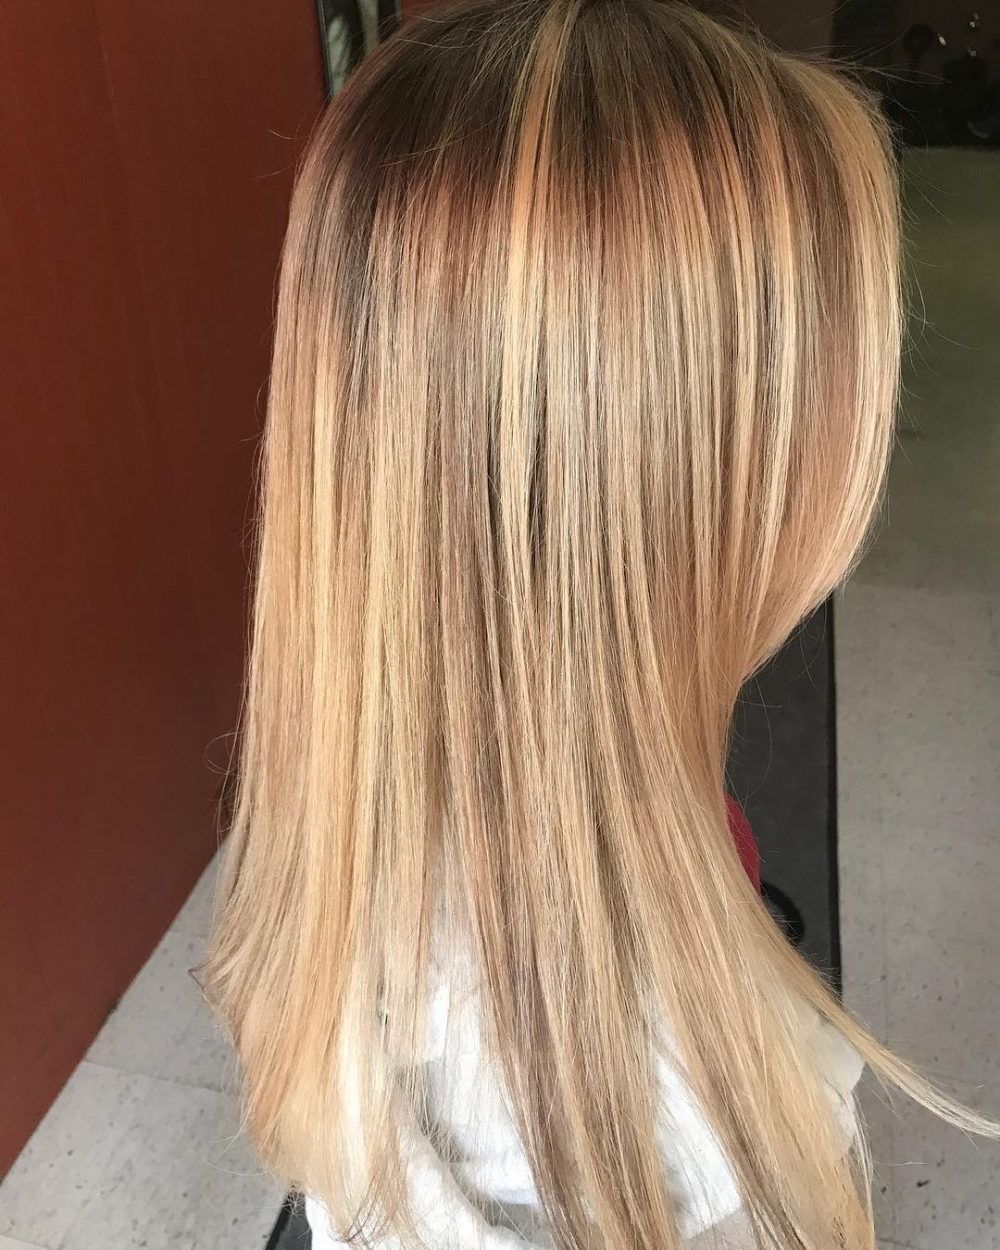 21 Hottest Honey Blonde Hair Color Ideas Of 2018 Intended For Well Known Honey Blonde Hairstyles (Gallery 20 of 20)